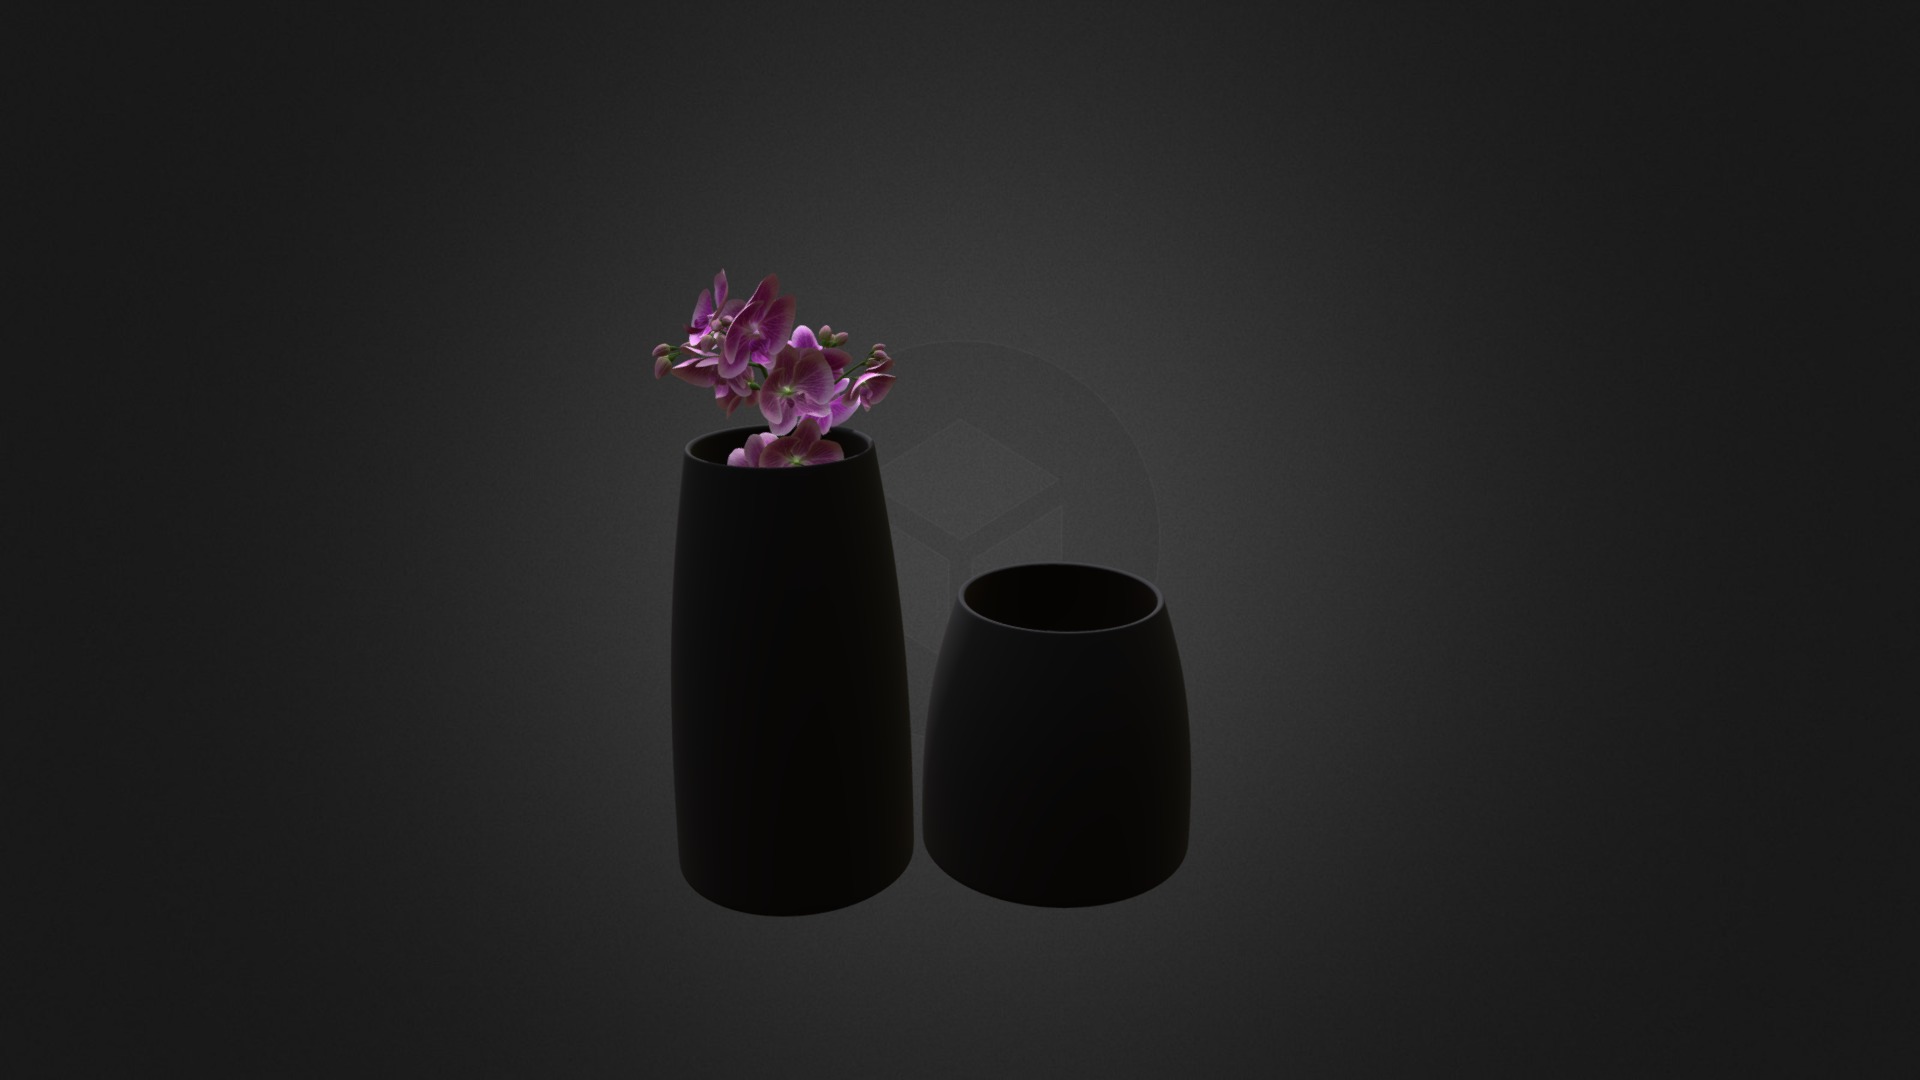 3D model Orchid Flower in Glass Pot - This is a 3D model of the Orchid Flower in Glass Pot. The 3D model is about a couple of vases with flowers in them.